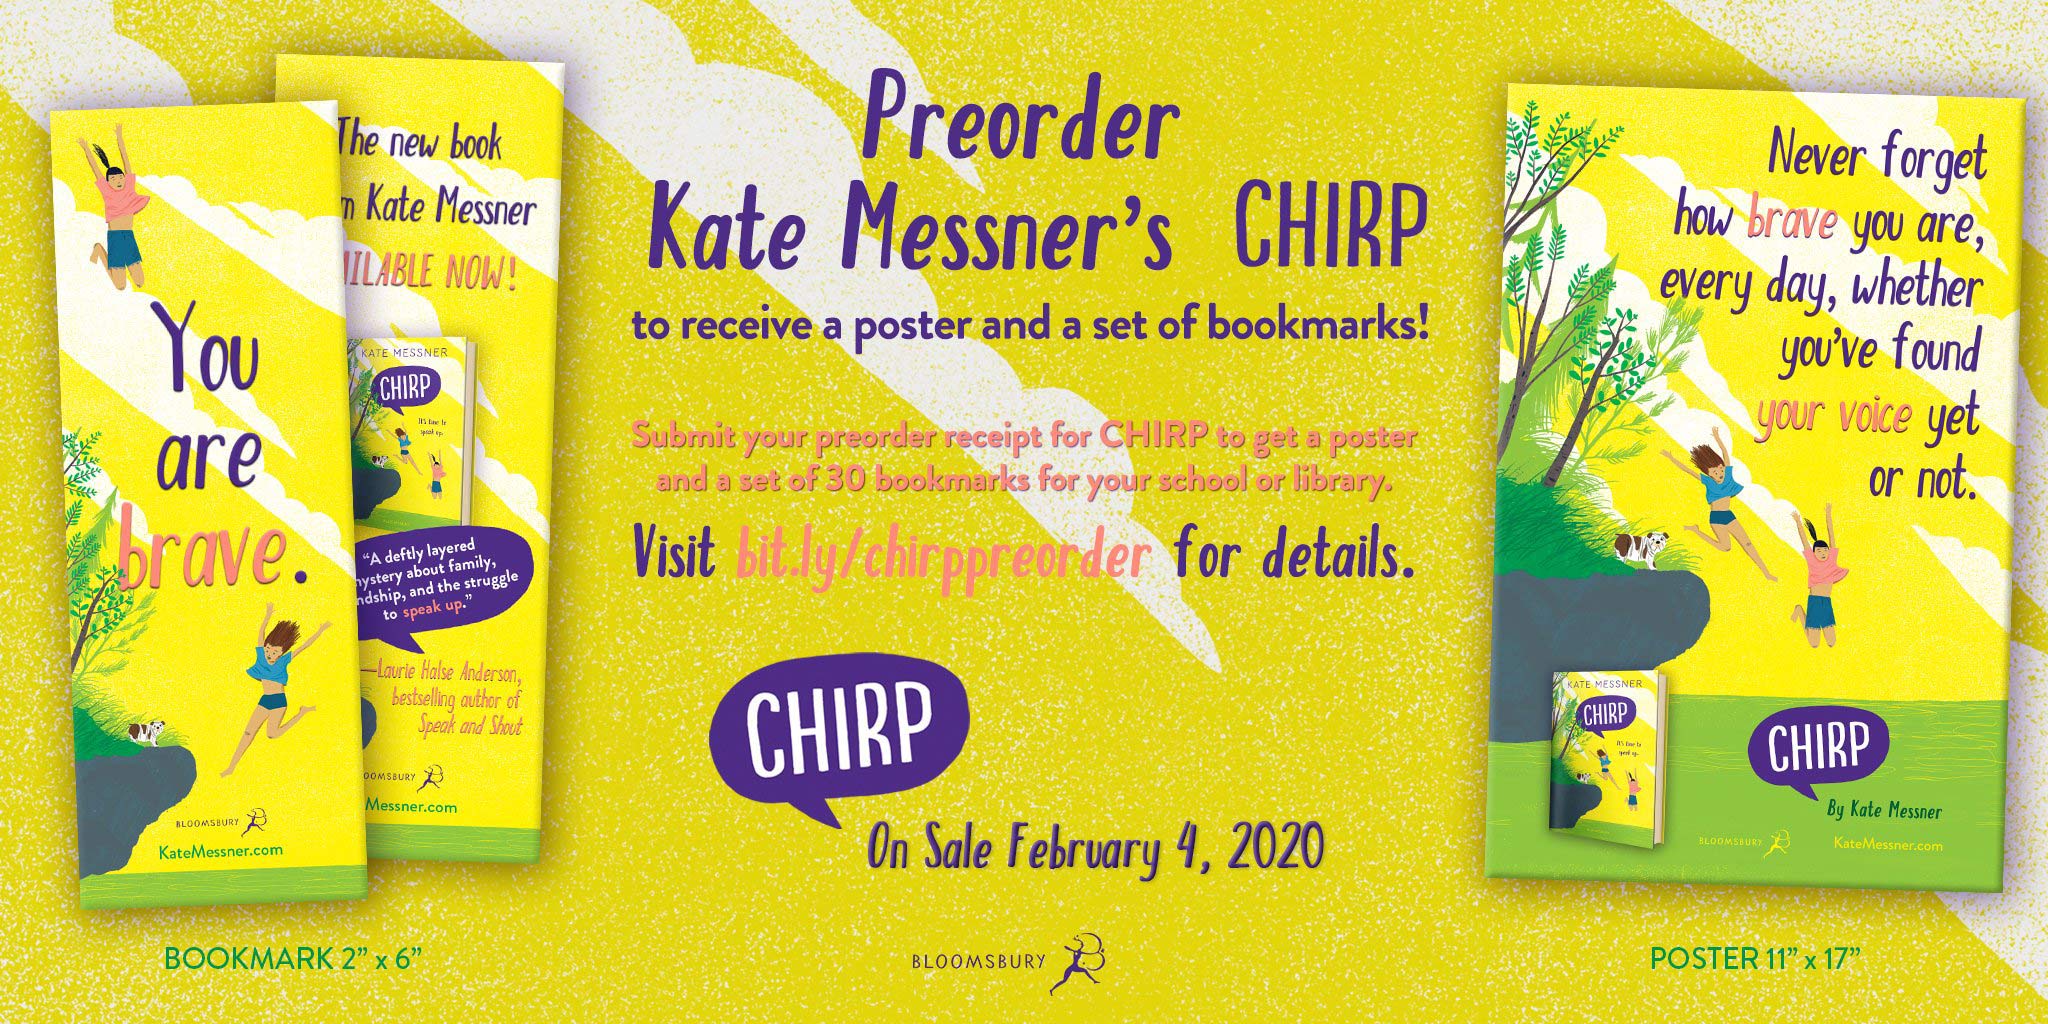 Pre-order Chirp and get a poster and a set of 30 bookmarks for your school or library. Visit bit.ly/chirppreorder for details